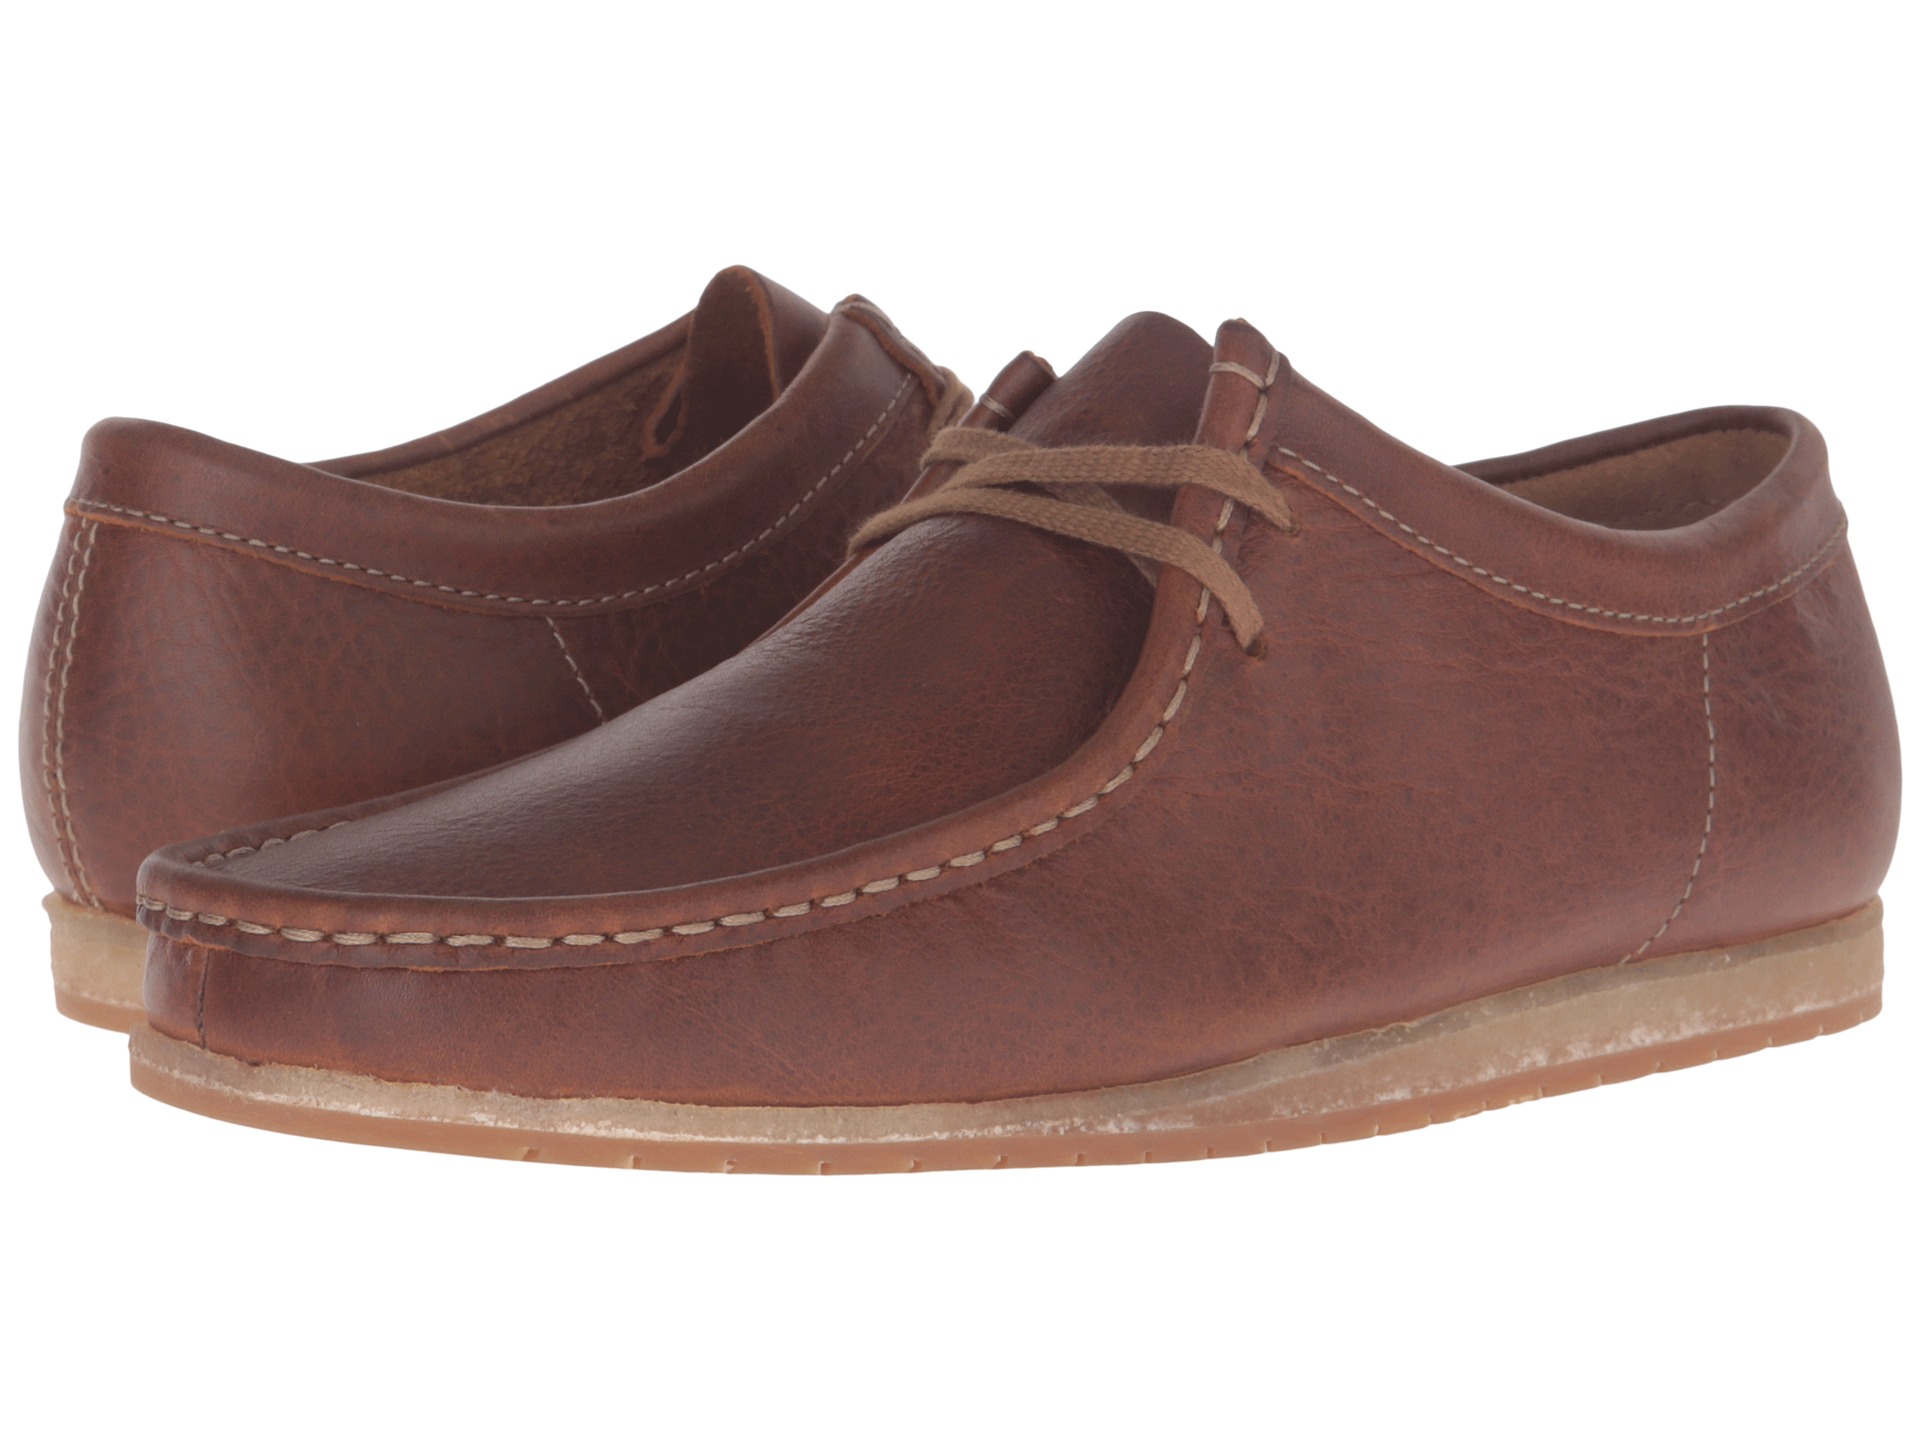 Clarks Wallabee Step at Zappos.com